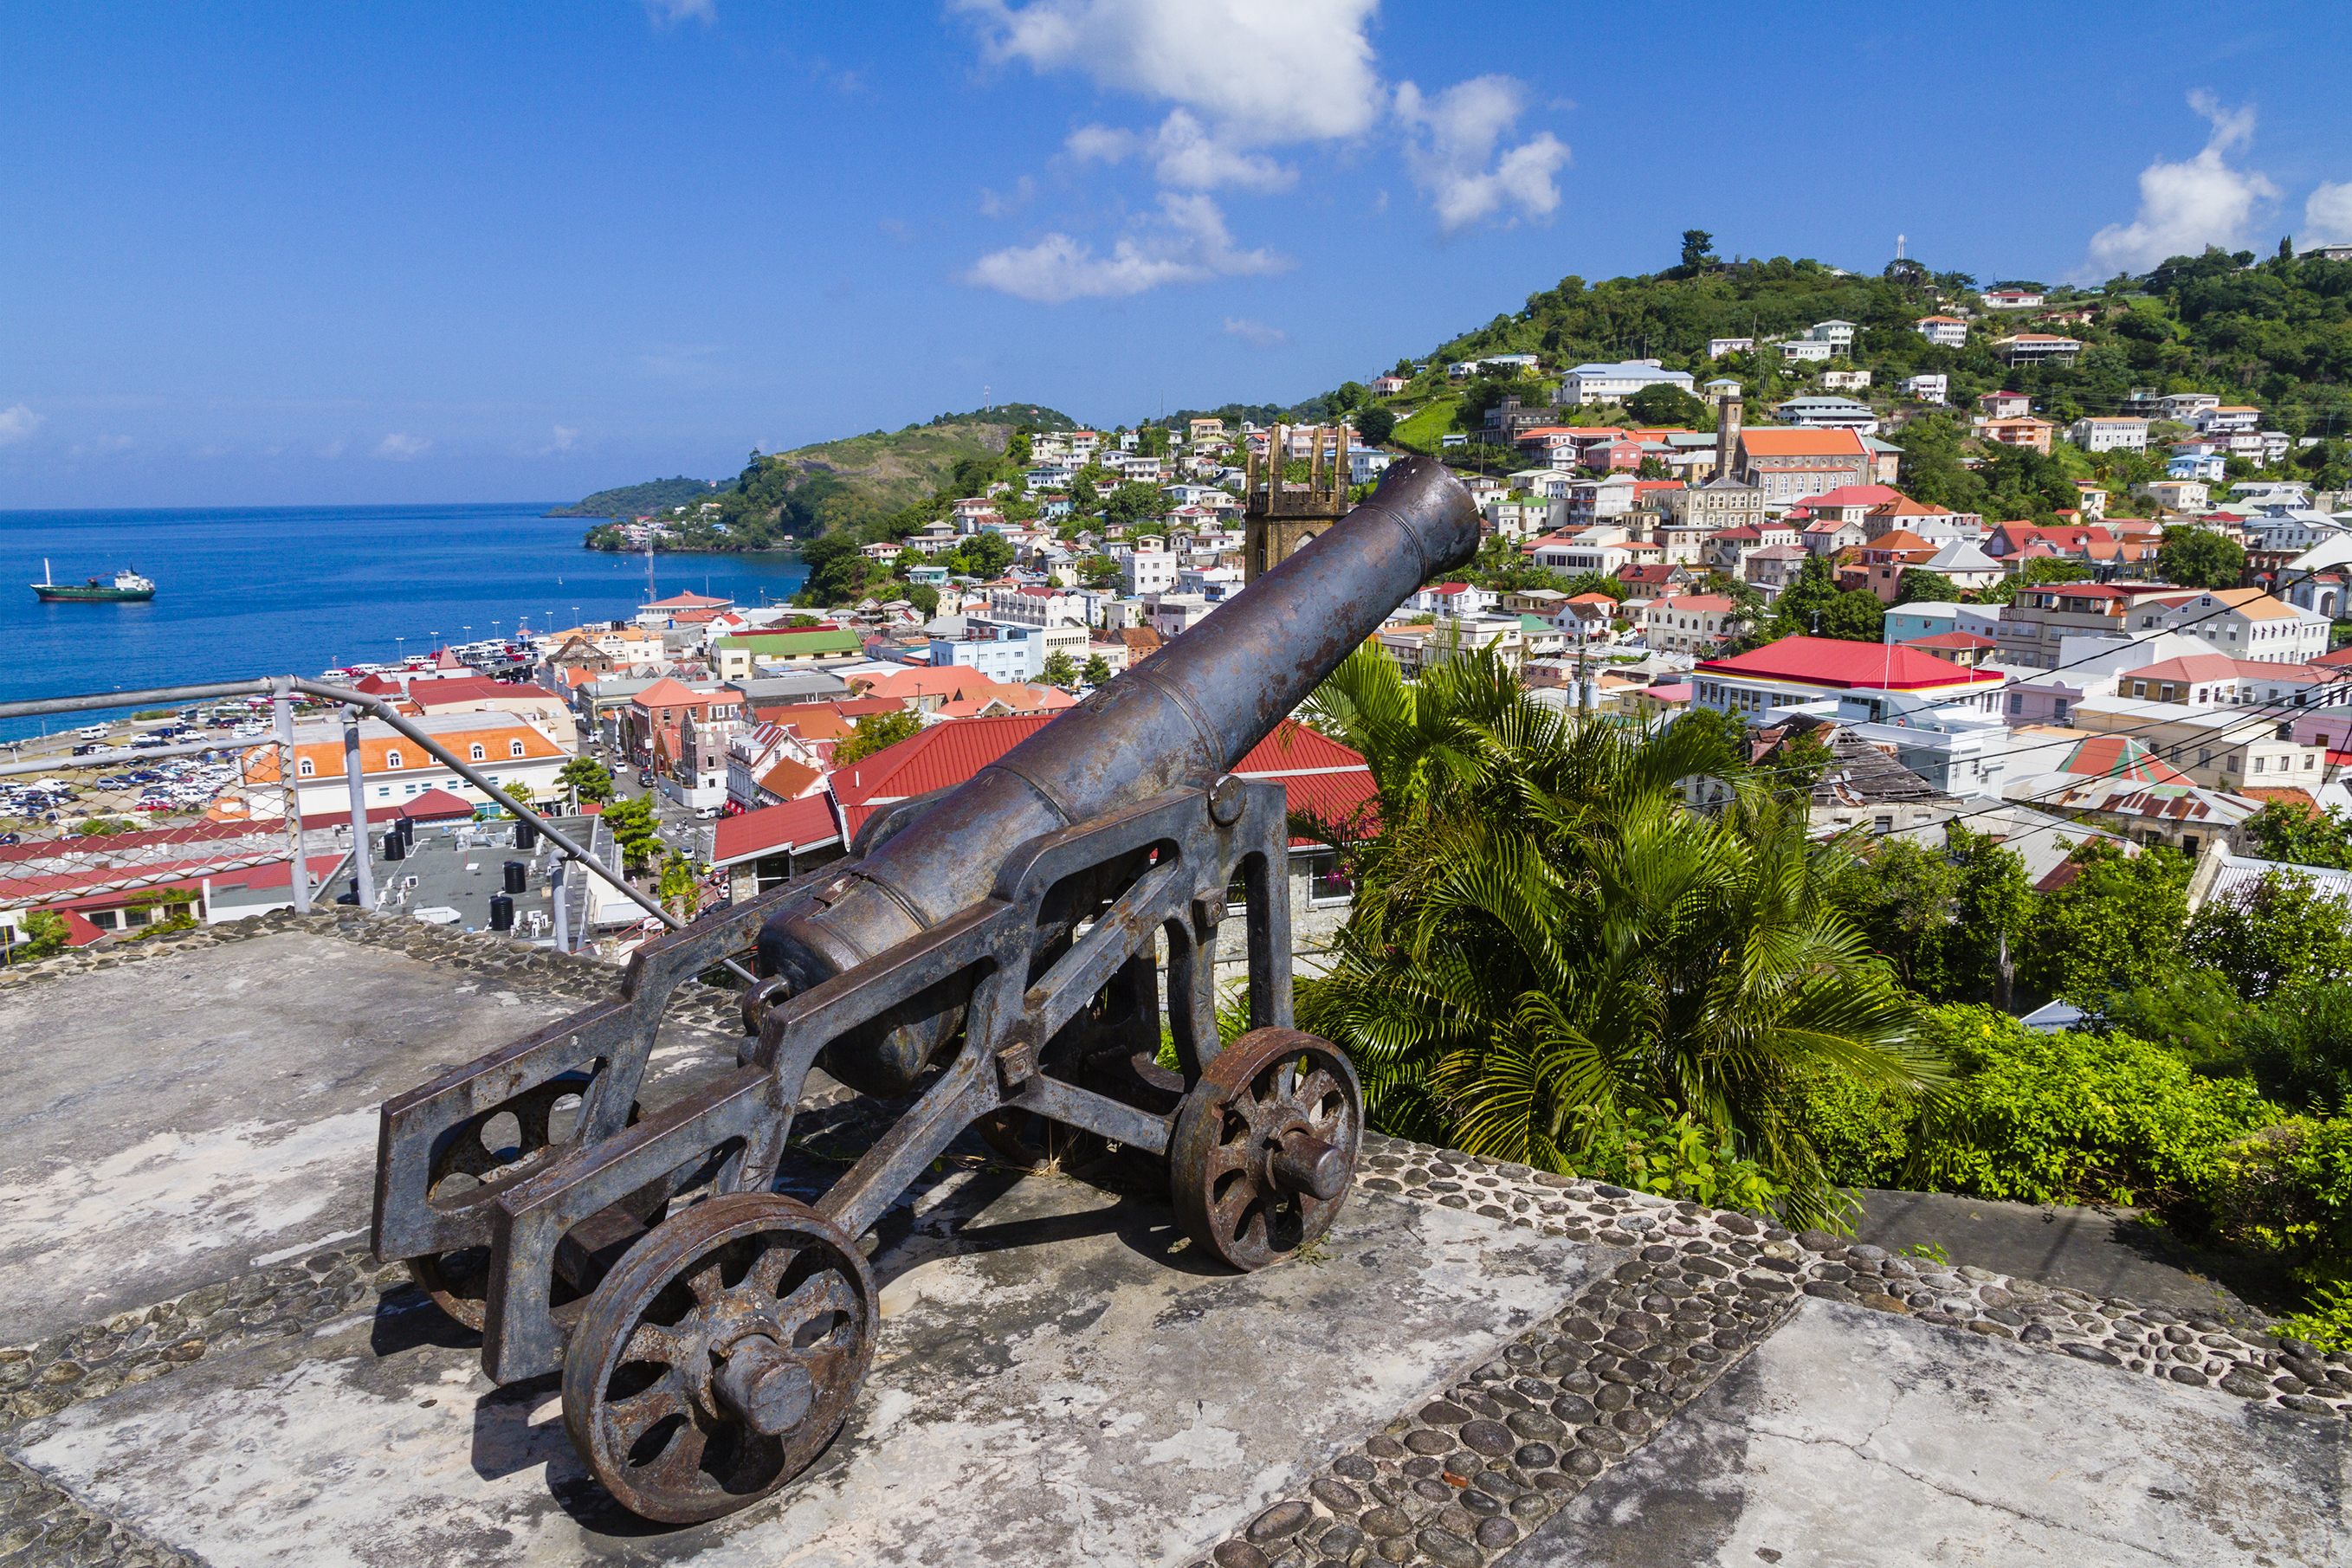 Cannon located on Fort George pointed to St. George's, the capital city of Grenada.